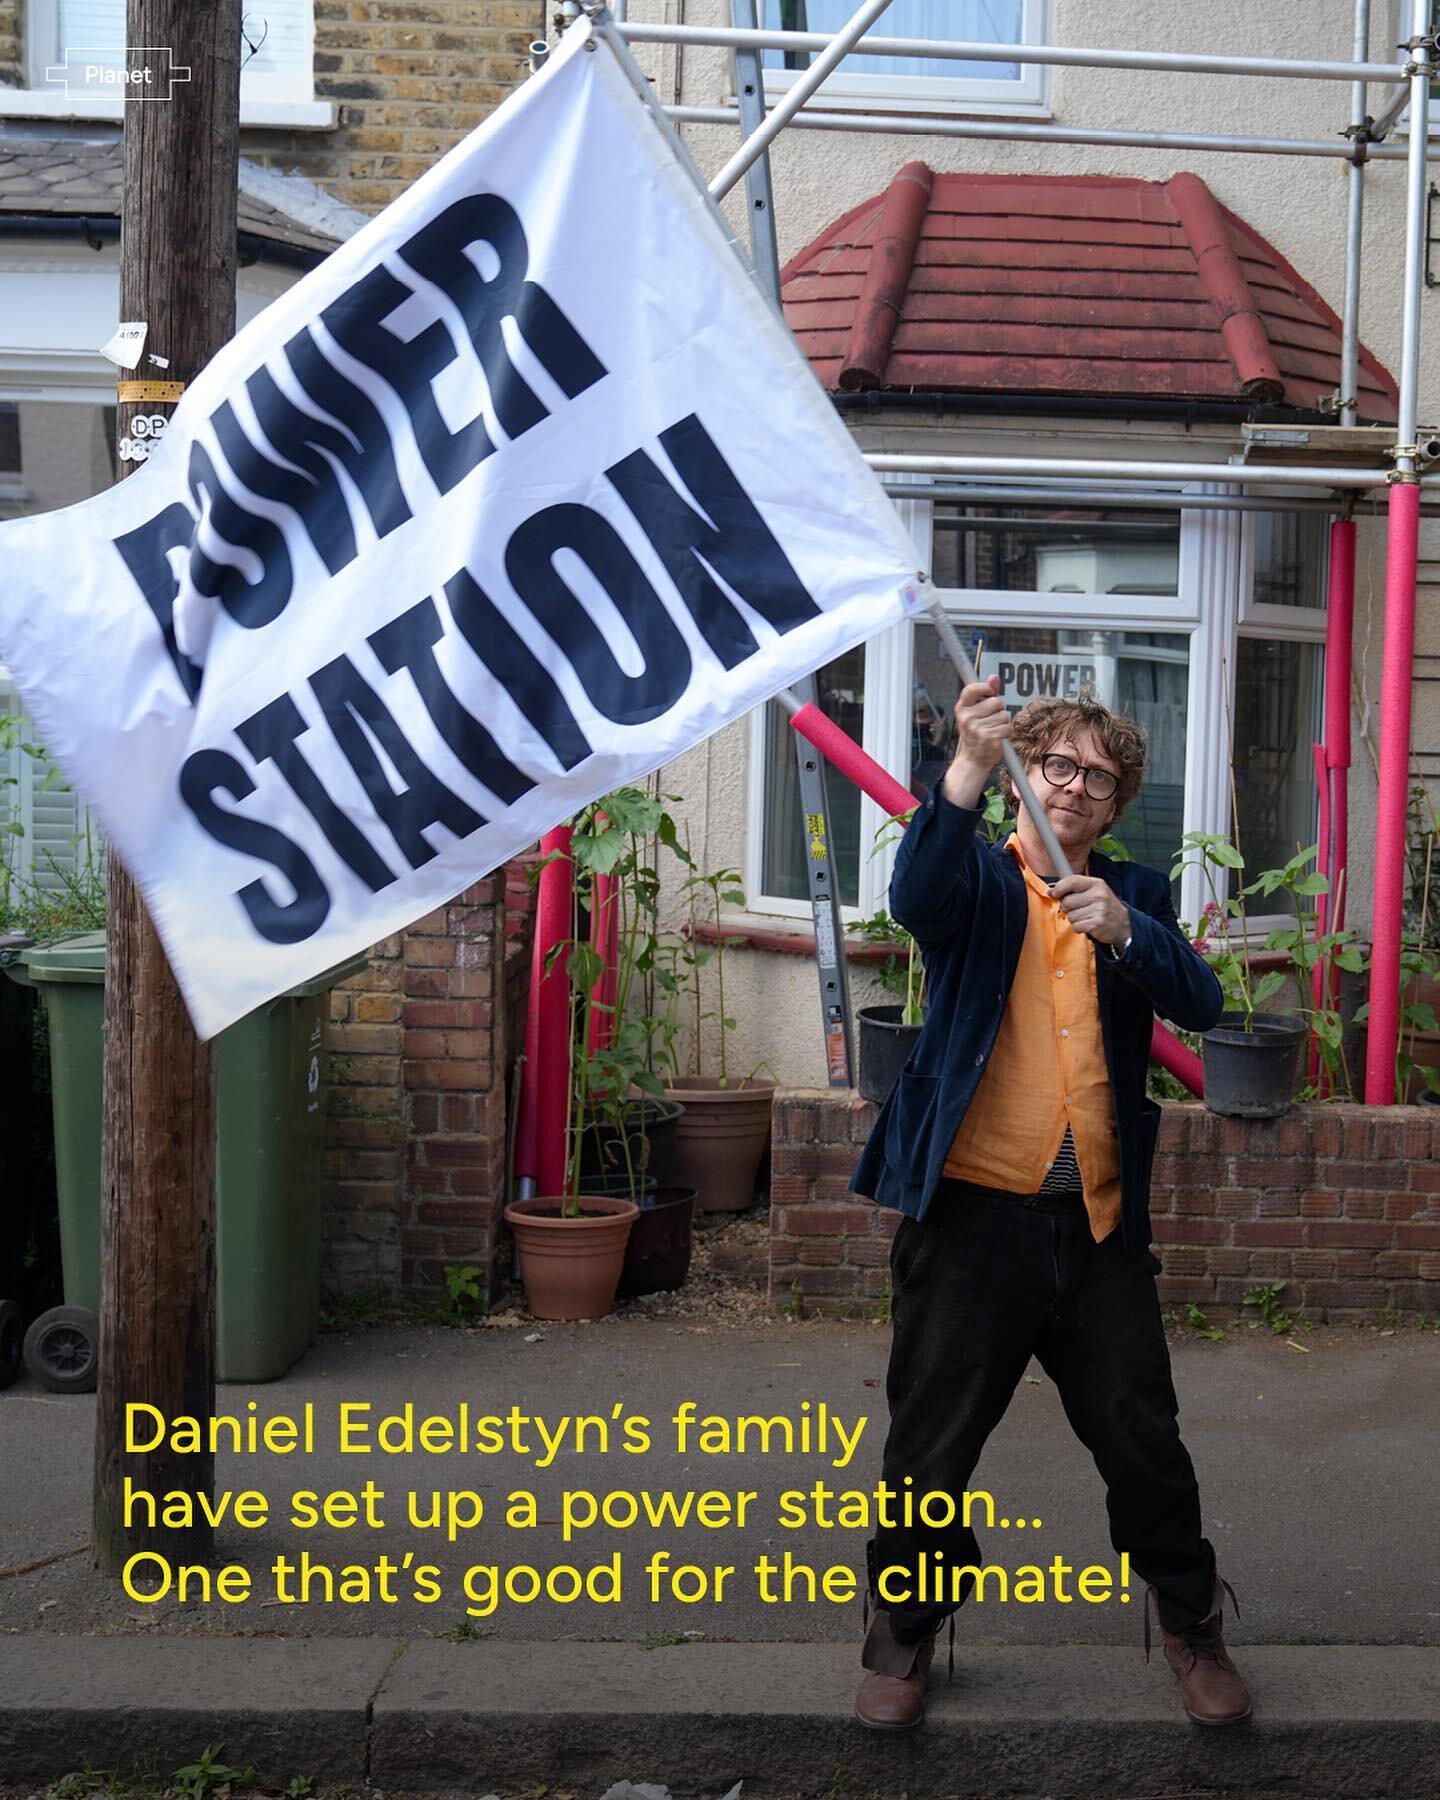 This father is working with his family and neighbours to build a Power Station - not the standard kind, but an incredible initiative using art to bring renewable energy to the community of Walthamstow. 

For #LondonClimateActionWeek Smiley News met D